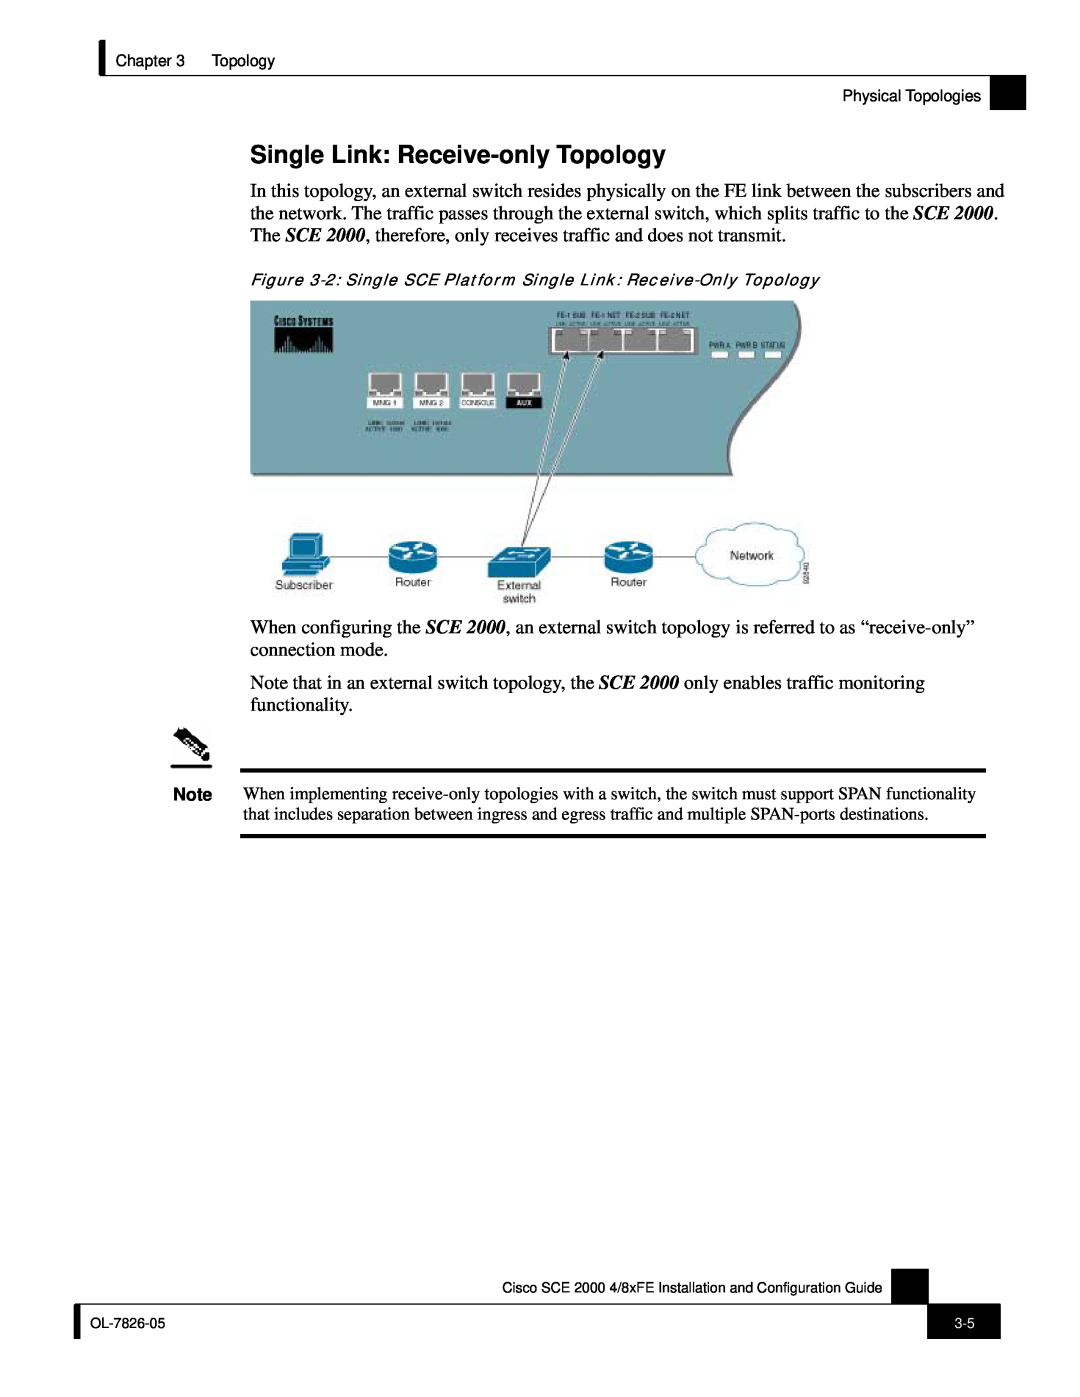 Cisco Systems SCE 2000 4/8xFE Single Link Receive-only Topology, 2 Single SCE Platform Single Link Receive-Only Topology 